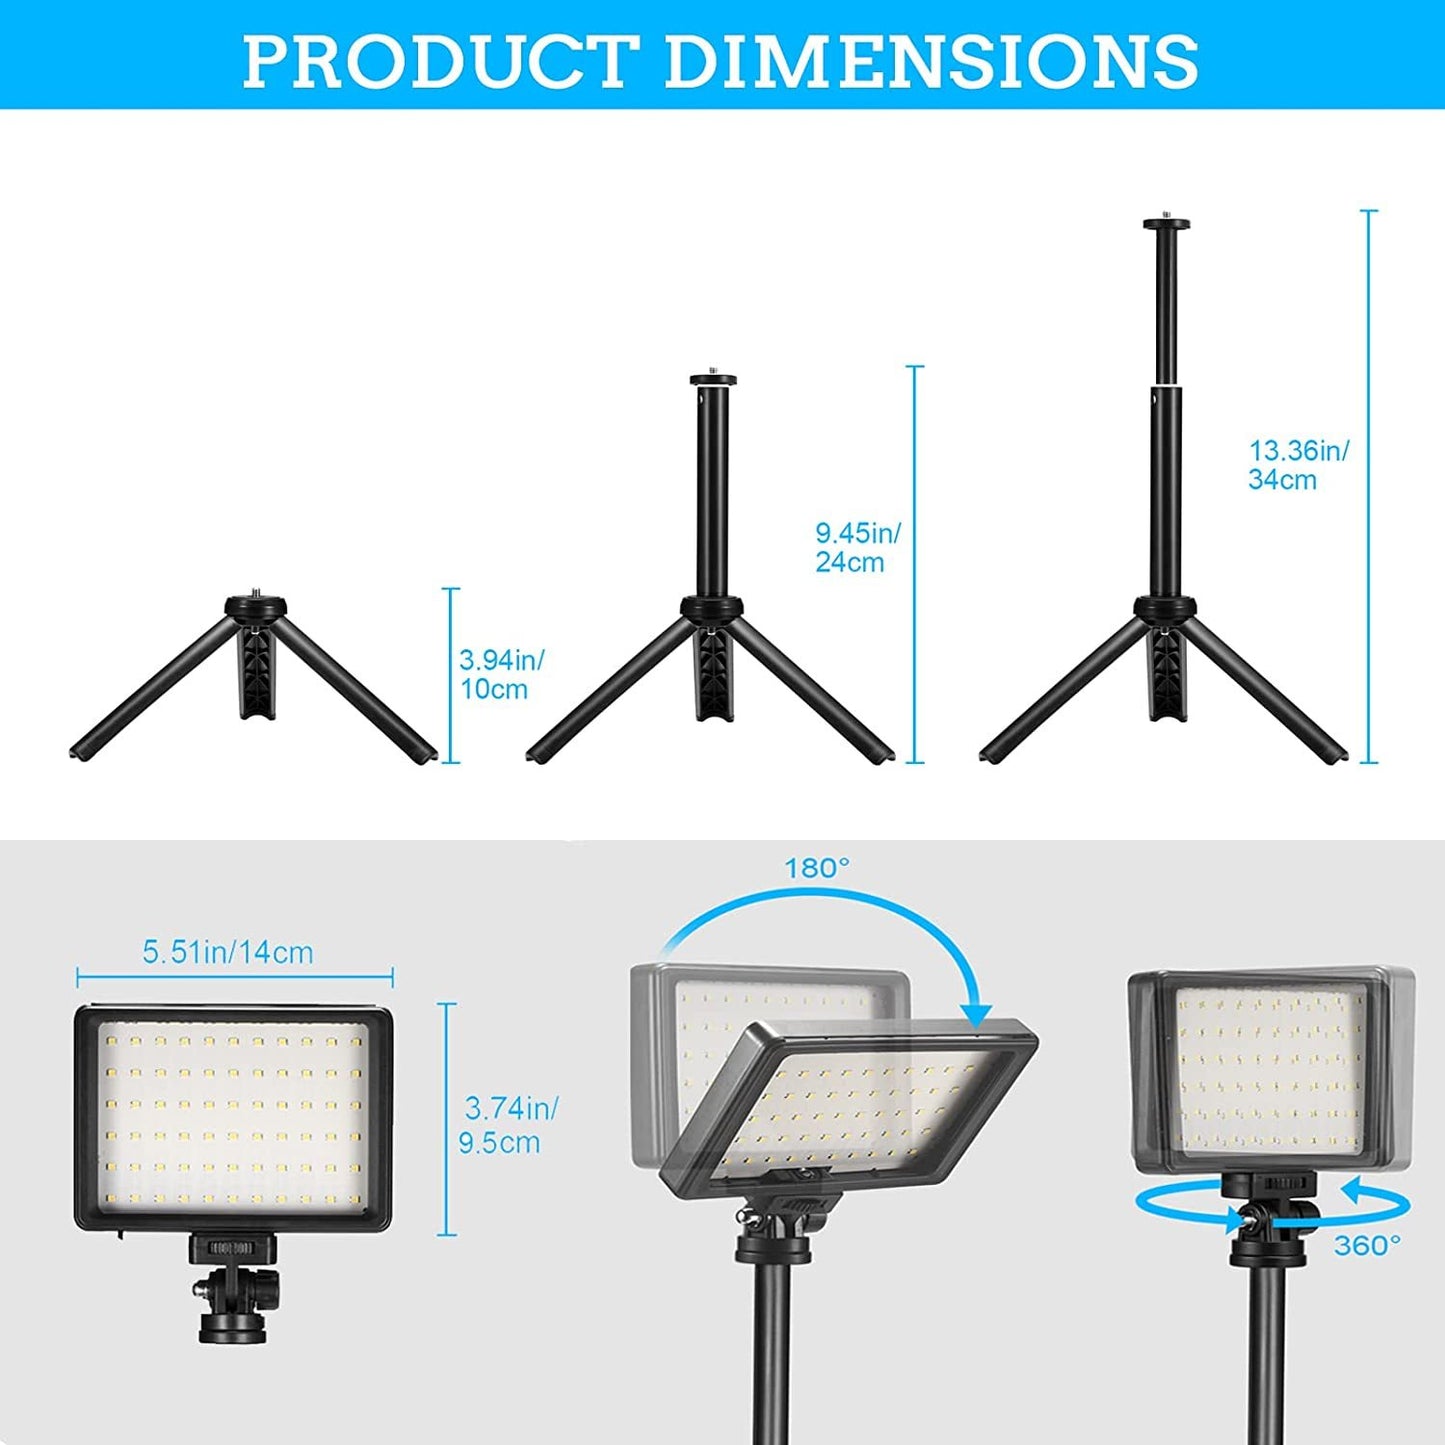 Versatile LED Video Light Kit - Studio Lighting with RGB Filters. Perfect for Streaming & Photography.